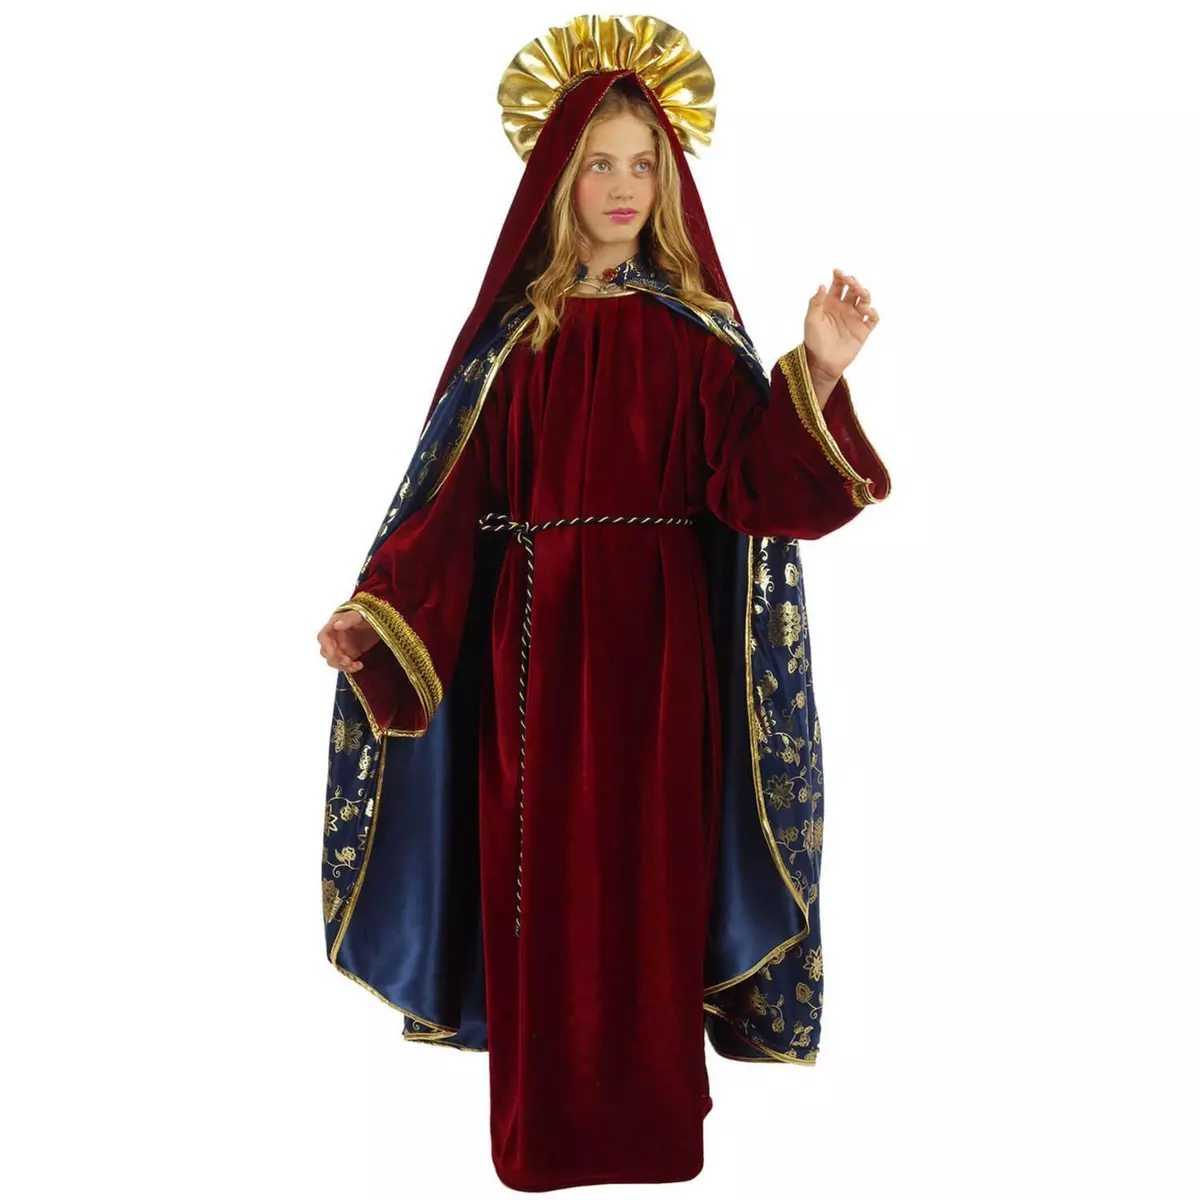  Costume Vierge Marie Deluxe - Fille - 11/12 ans (145 à 152 cm)